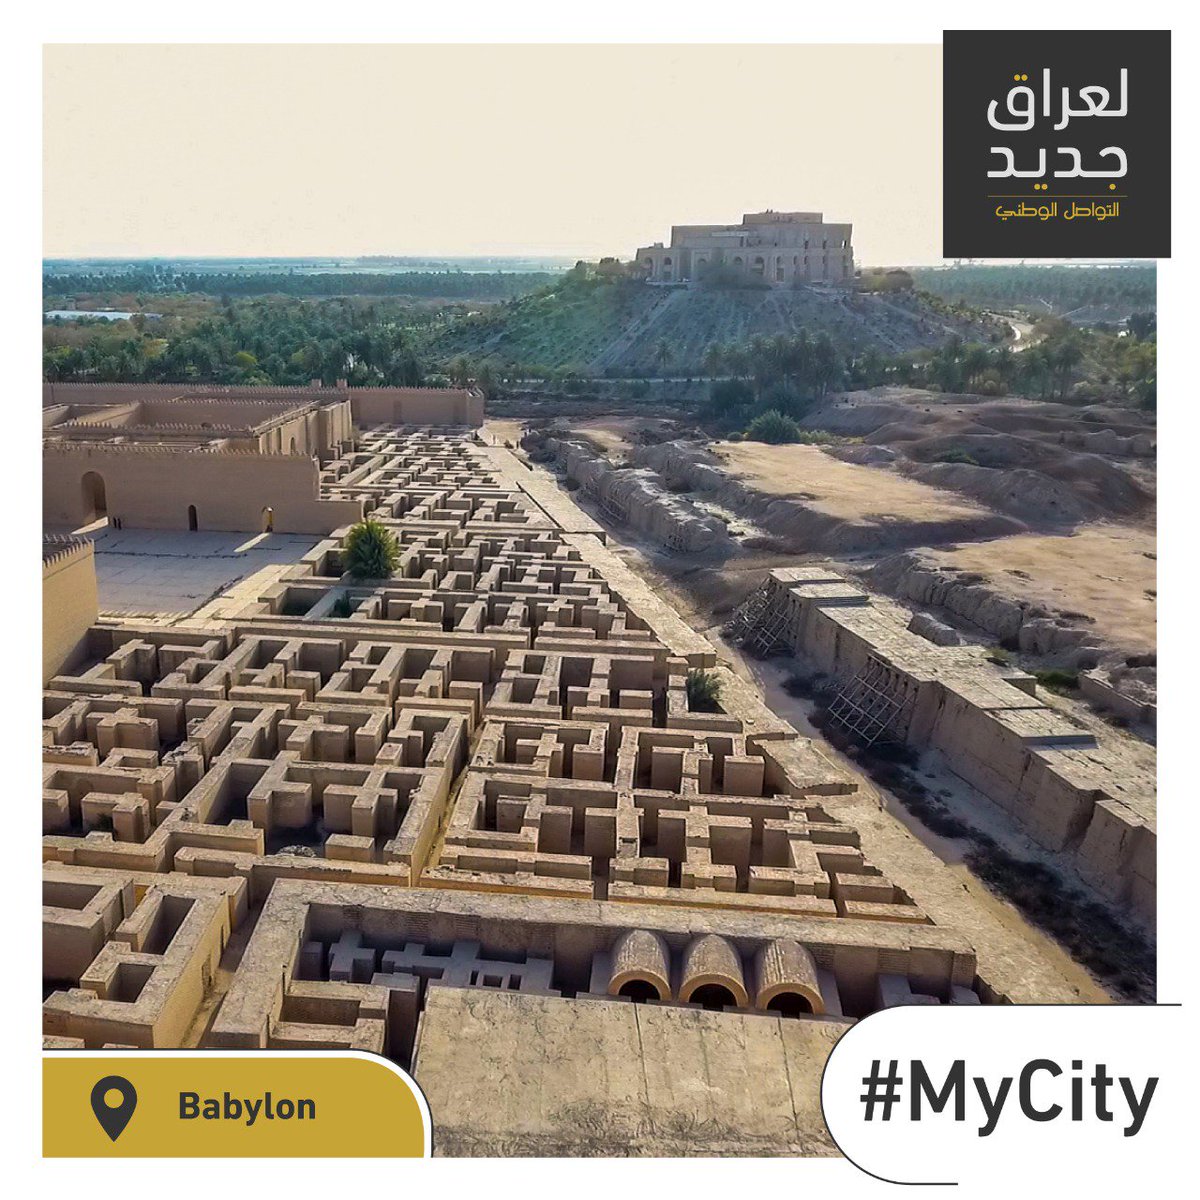 Babylon is home to precious archaeological sites, and some of the world's most ancient wonders. A treasure for #Iraq and the world. Protecting this heritage is a national duty, let’s #Unite4Heritage #MyCity.